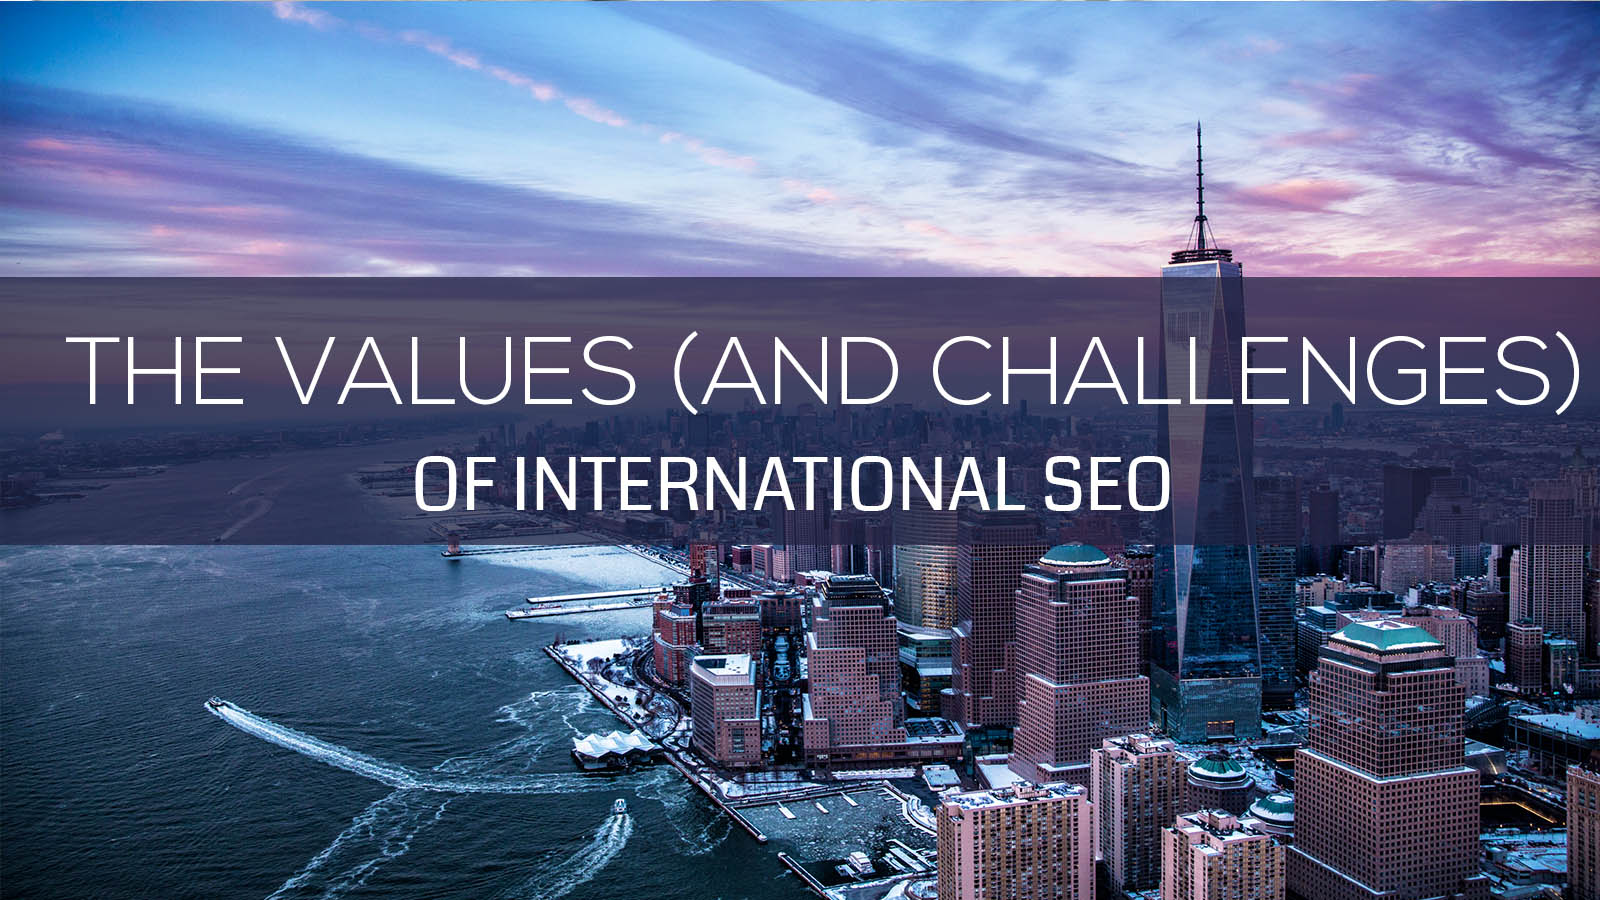 The Values (and challenges) of International SEO